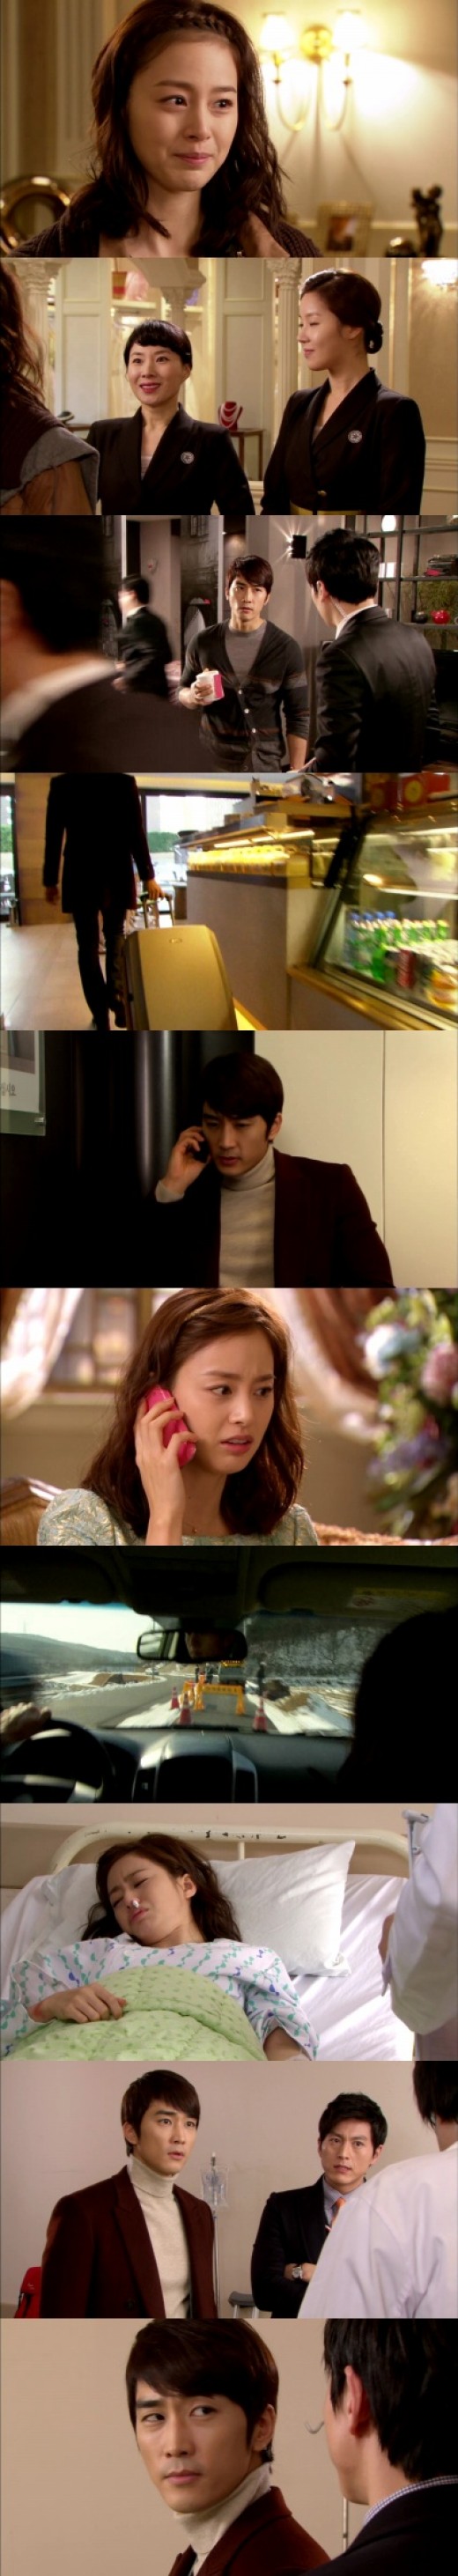 Spoiler My Princess Song Seung Heon Threatens Kim Tae Hee Marry Me Or Quit Being Princess